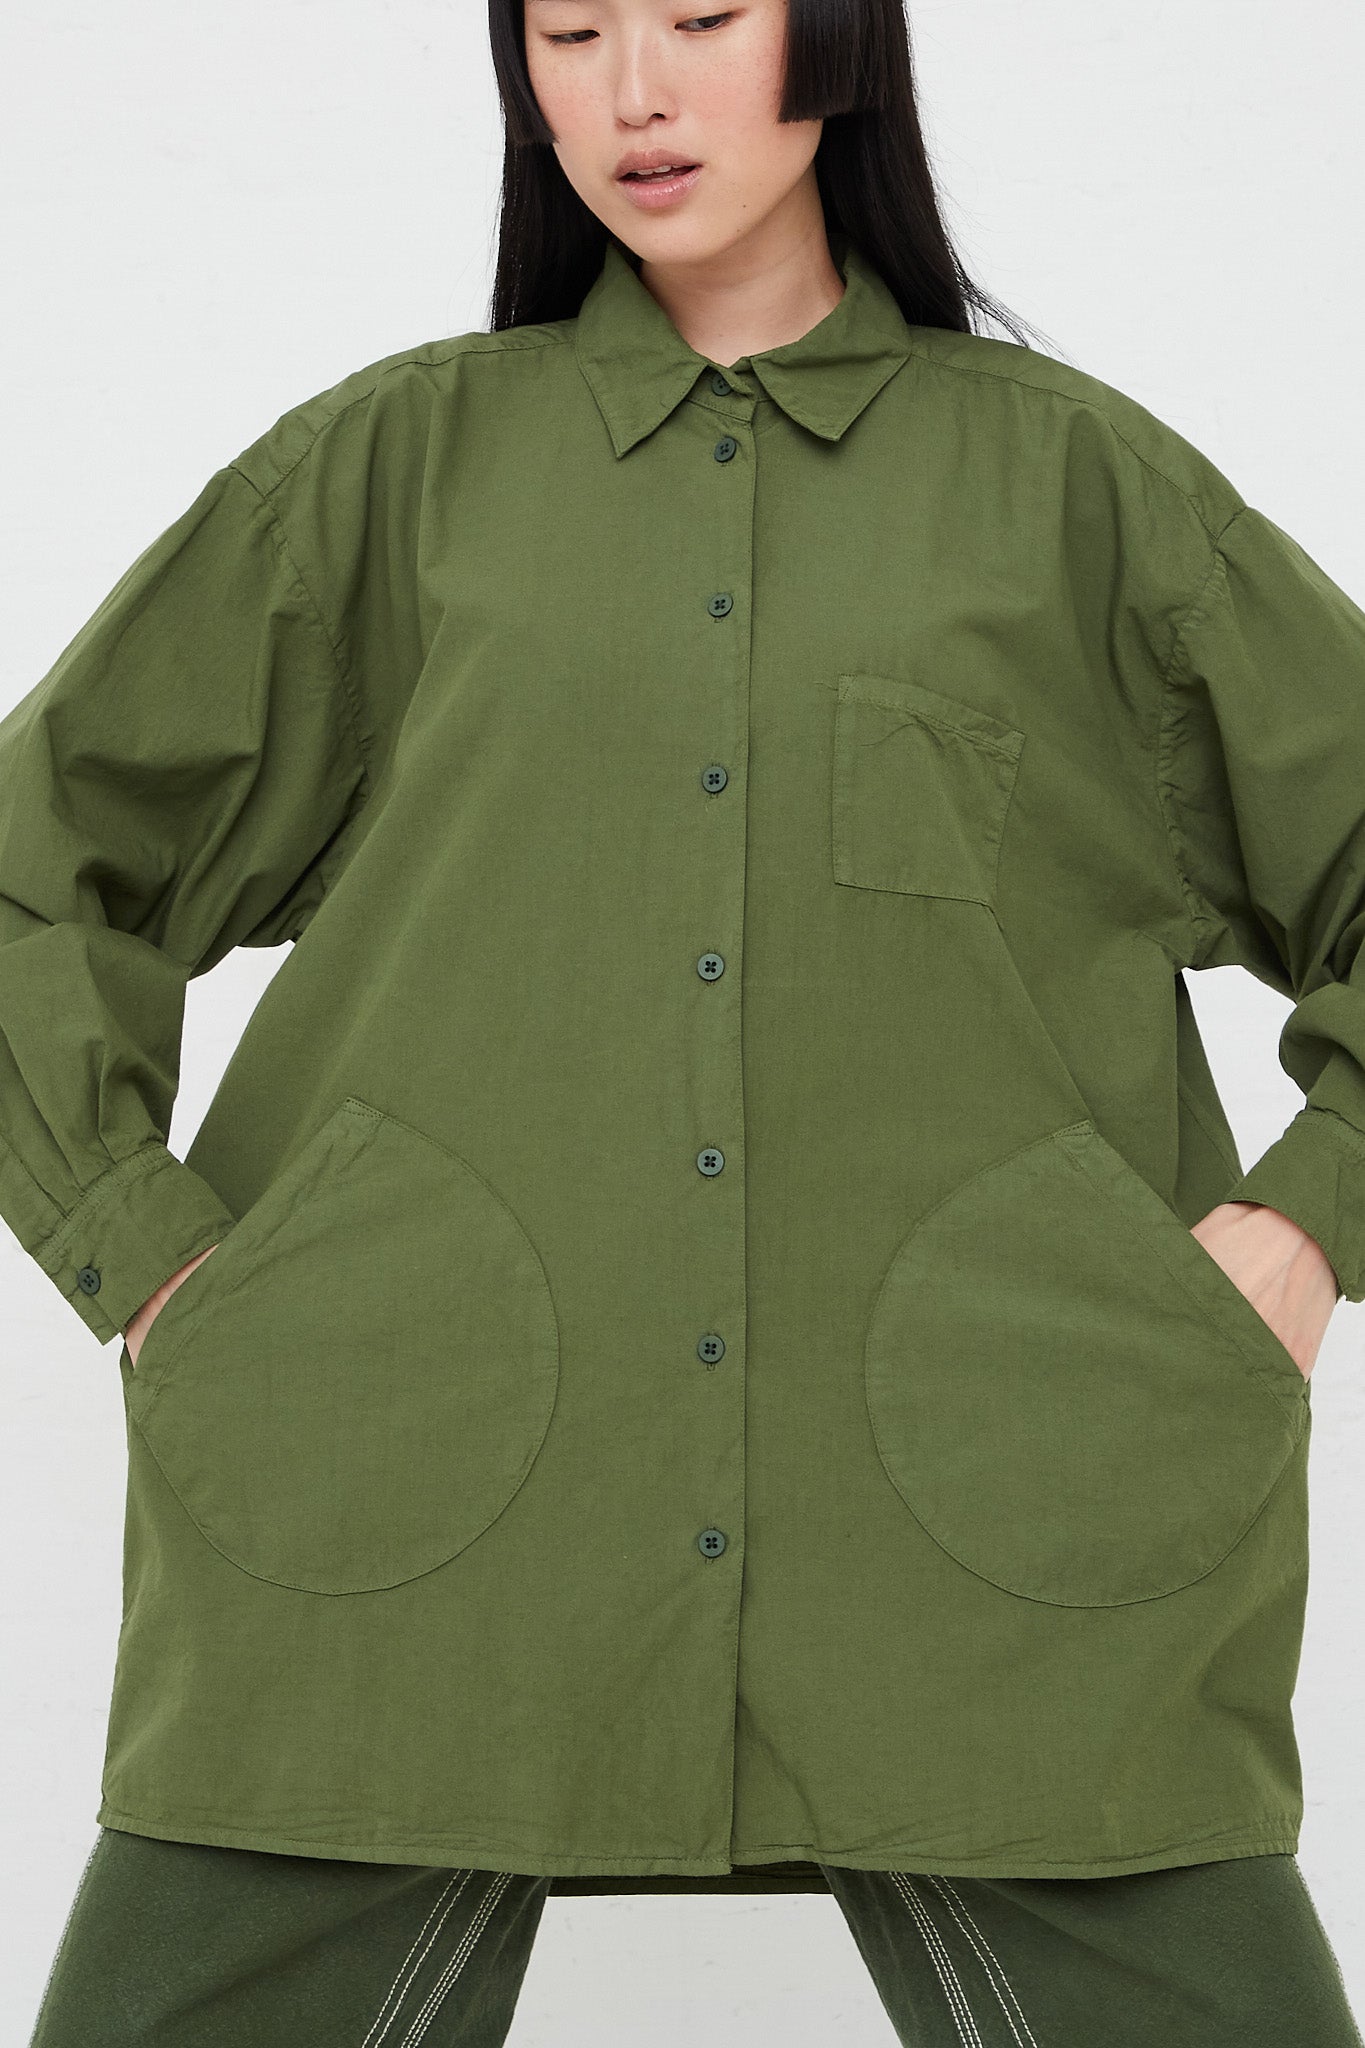 Okuda Cotton Poplin Shirt in Olive by Jesse Kamm for Oroboro Front Upclose